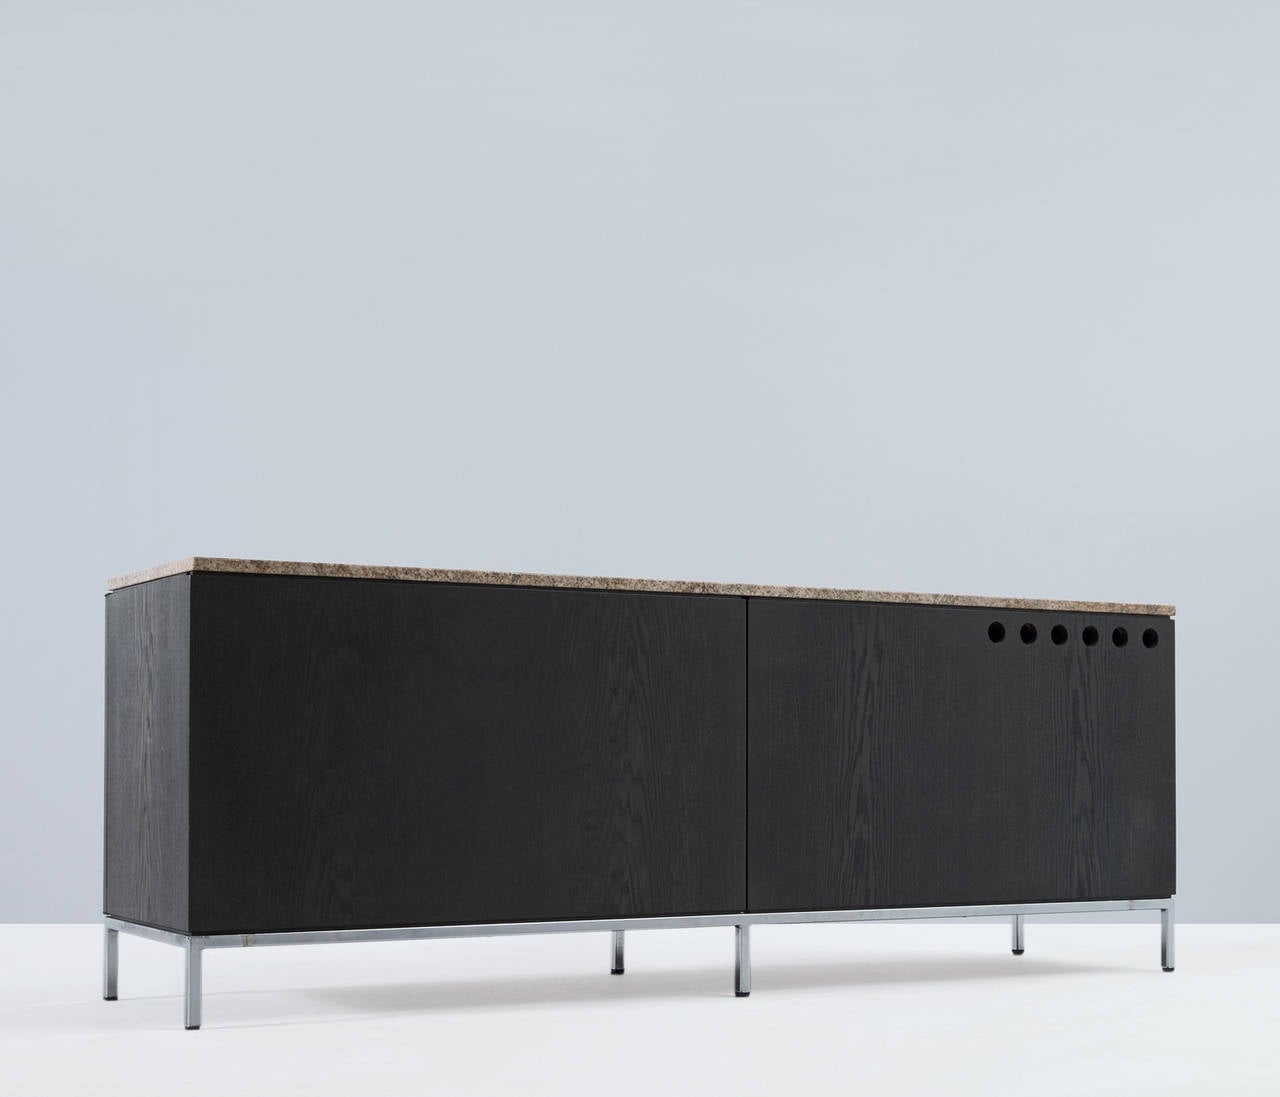 Sideboards, in oak, marble and metal, by Florence Knoll for Knoll International, United States. 

Credenza with chromed base designed by Florence Knoll for Knoll International. This exceptional and minimalistic designed credenza has elegant